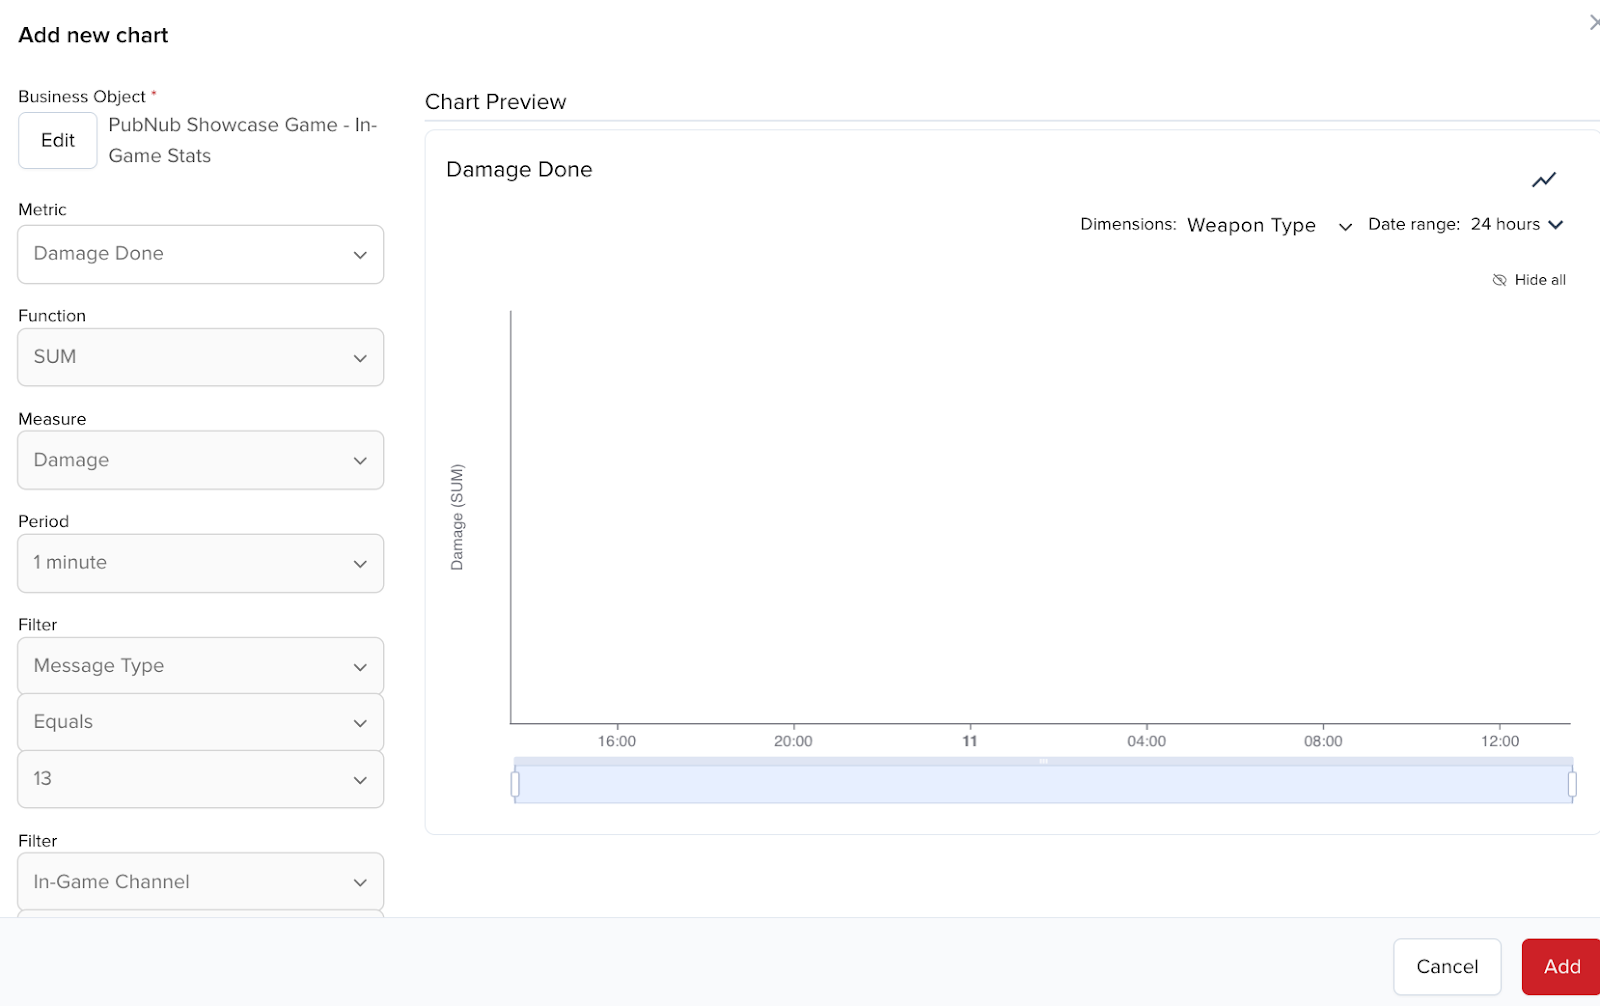 With Illuminate, you can add charts to Dashboards to visualize data.